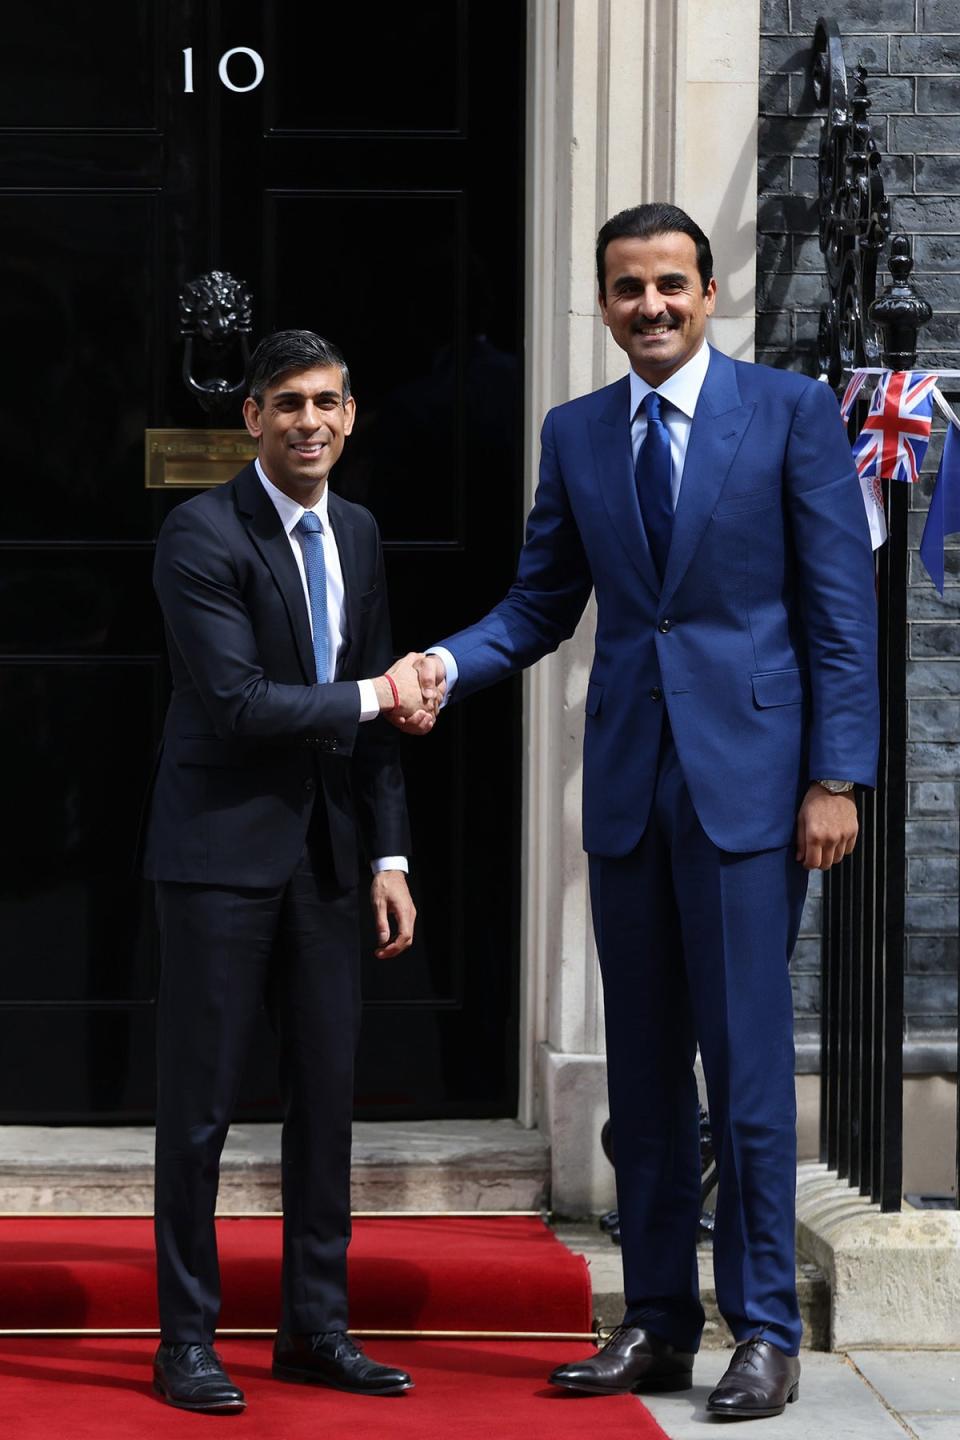 Rumours in Westminster say Sunak is partial to a silm fit, cropped suit to help offset his diminutive stature (Getty Images)